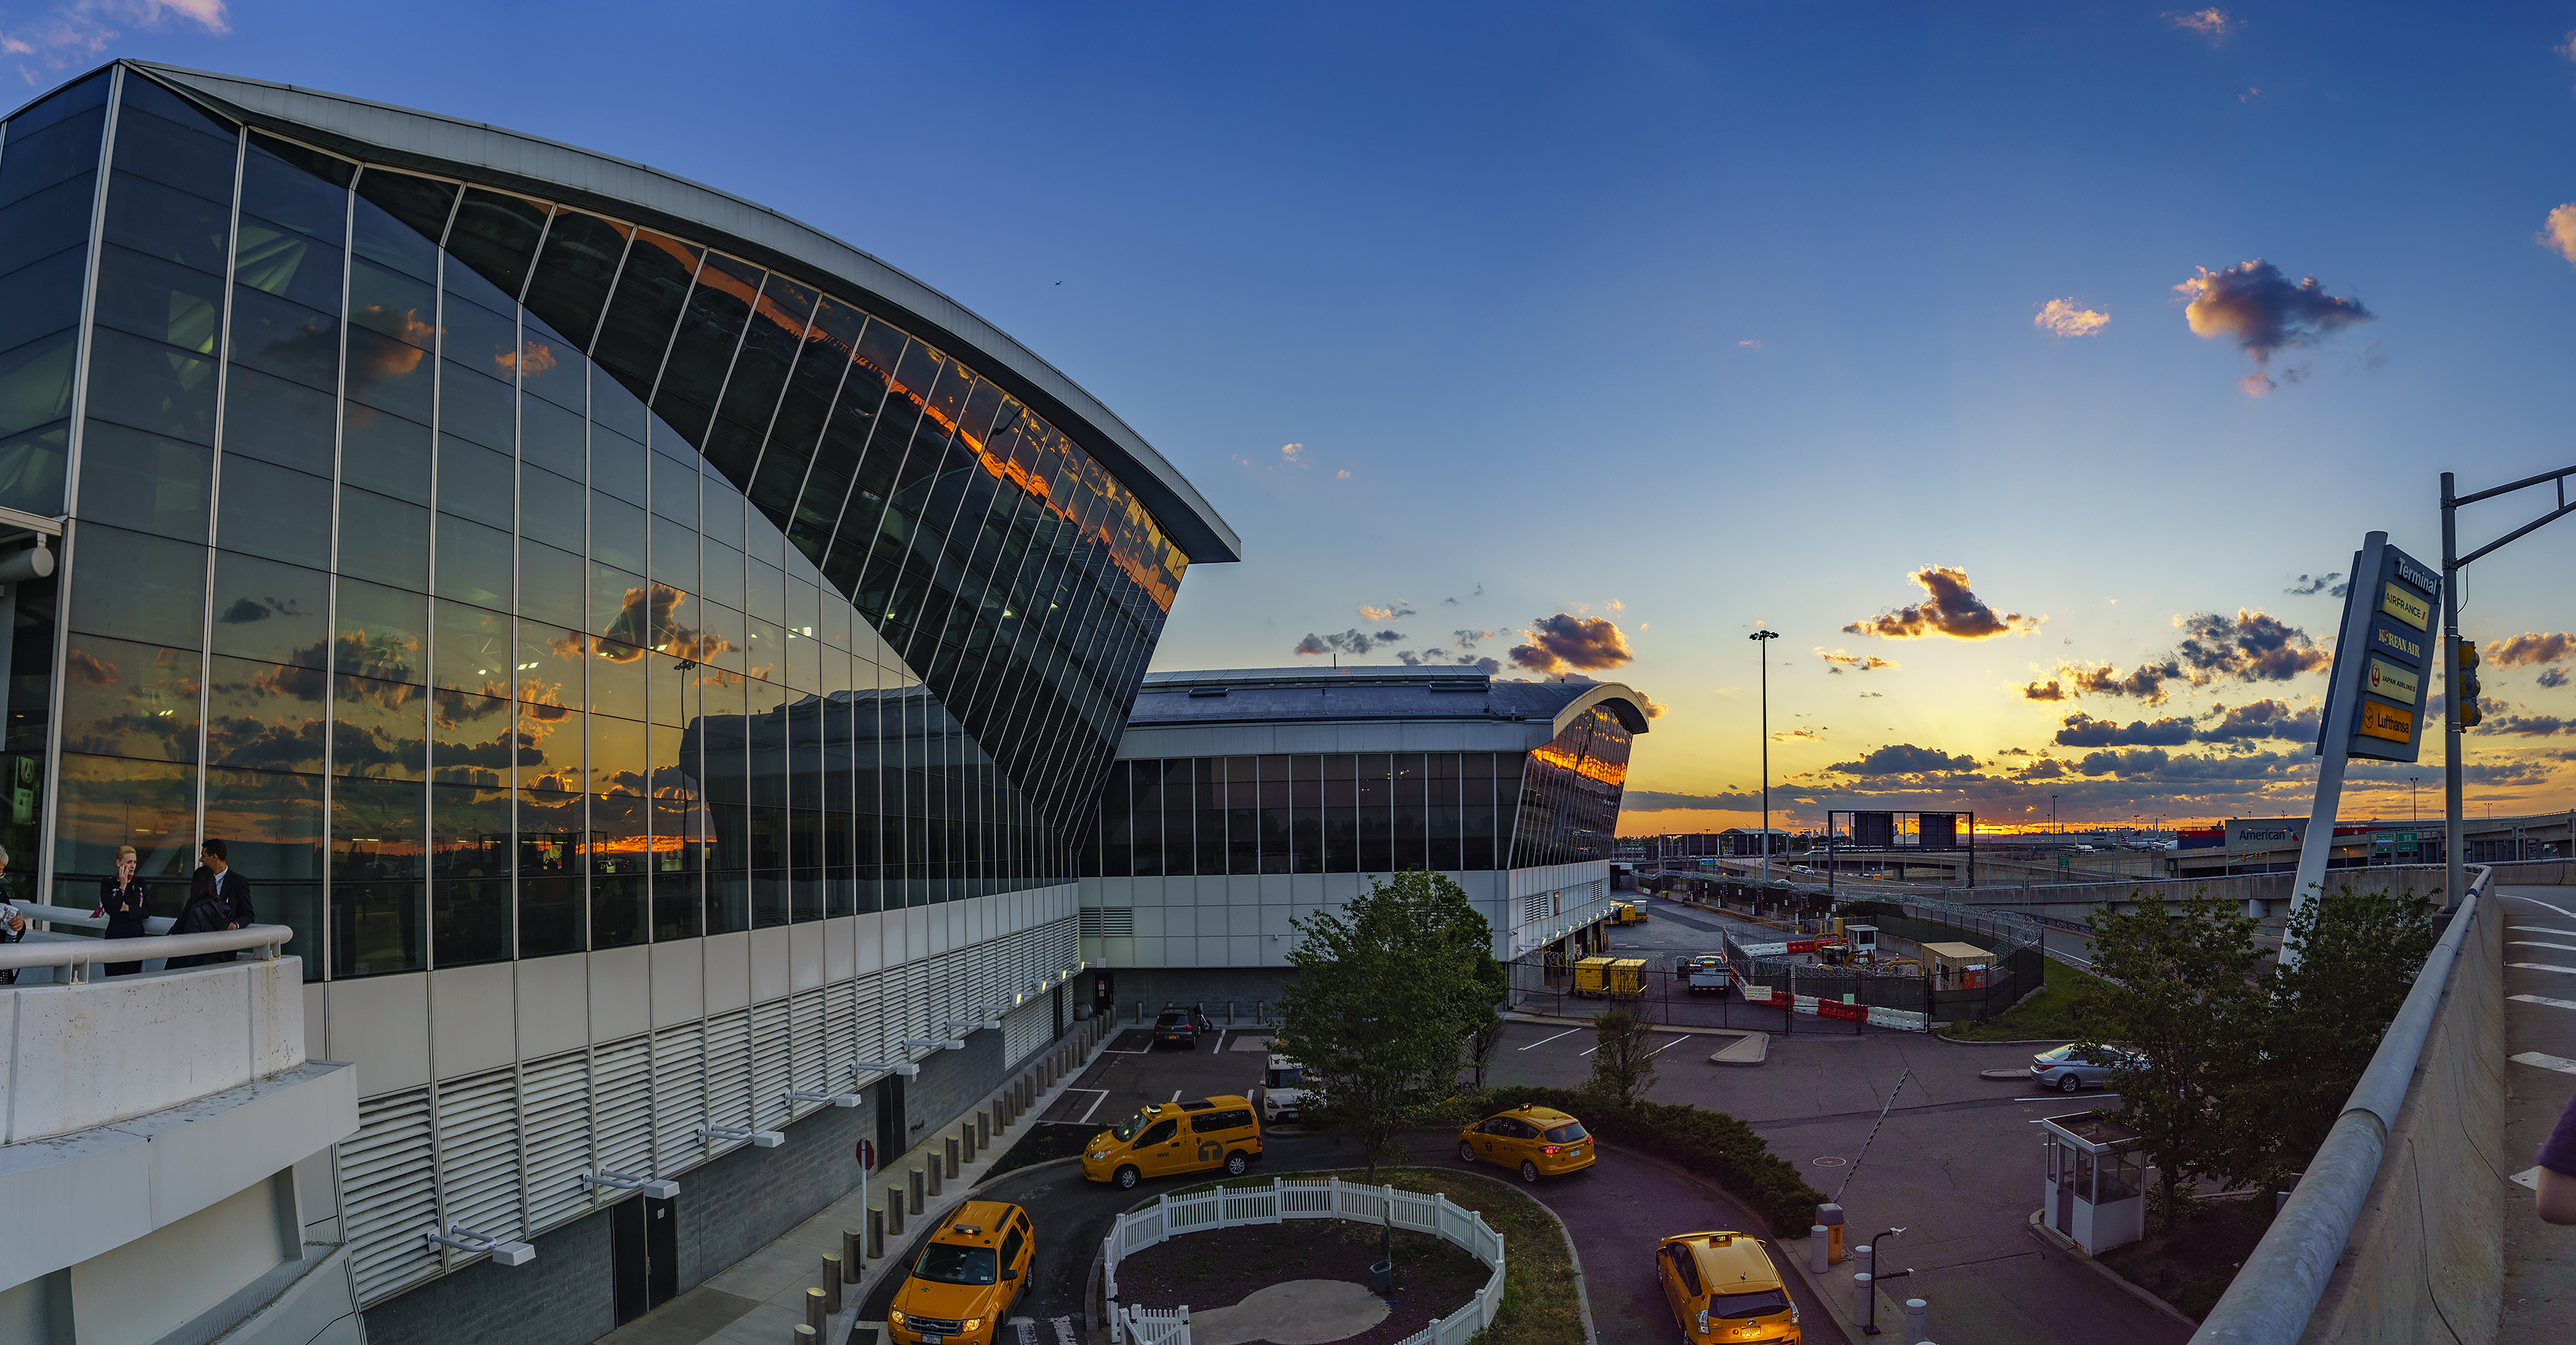 An exterior view of JFK airport with the sun setting in the background.